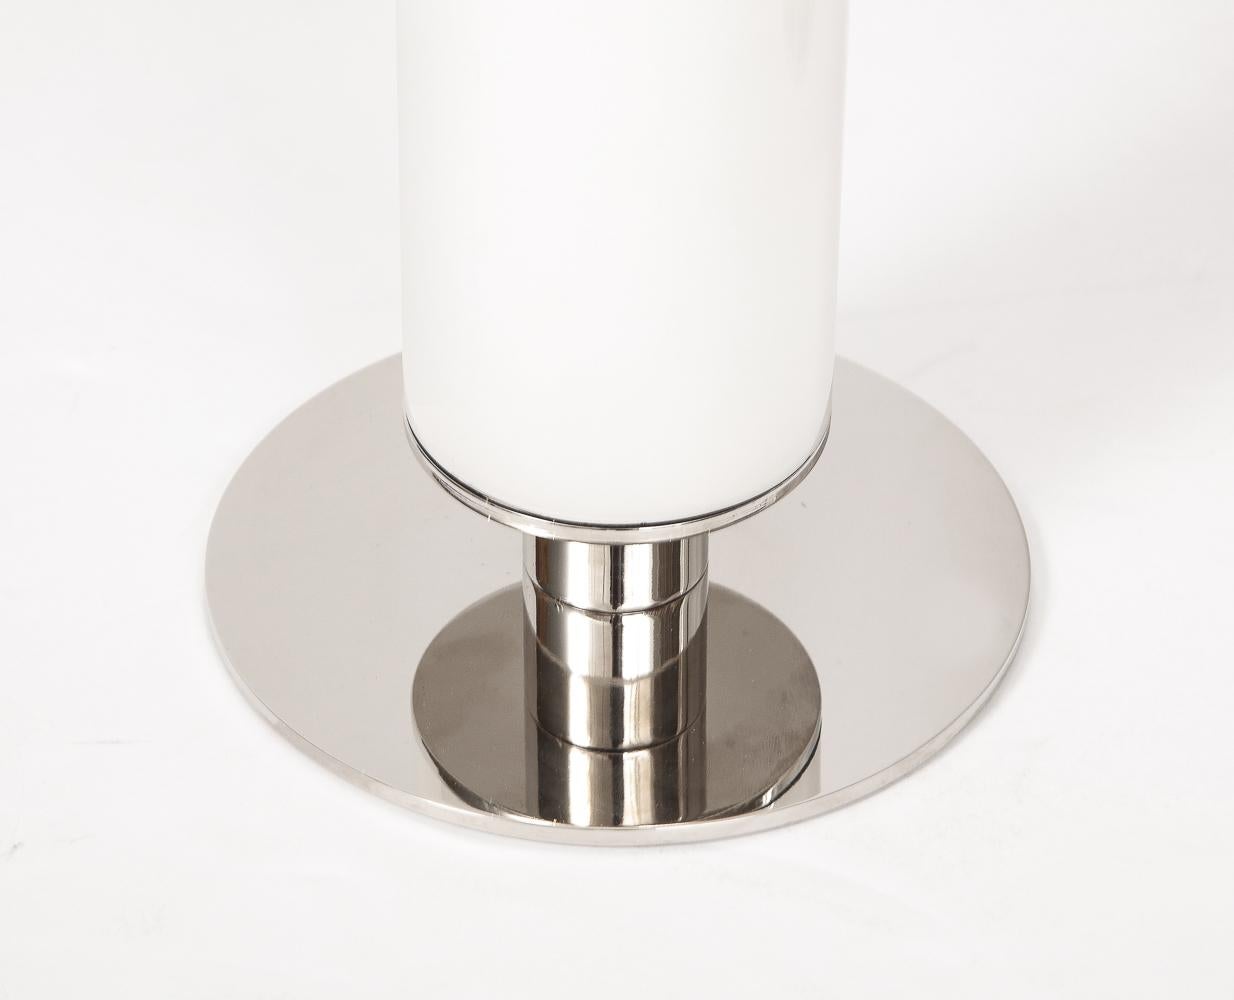 White & silver colored glass and chrome bases. Fabric lamp shades. Each lamp takes 2 candelabra bulbs.